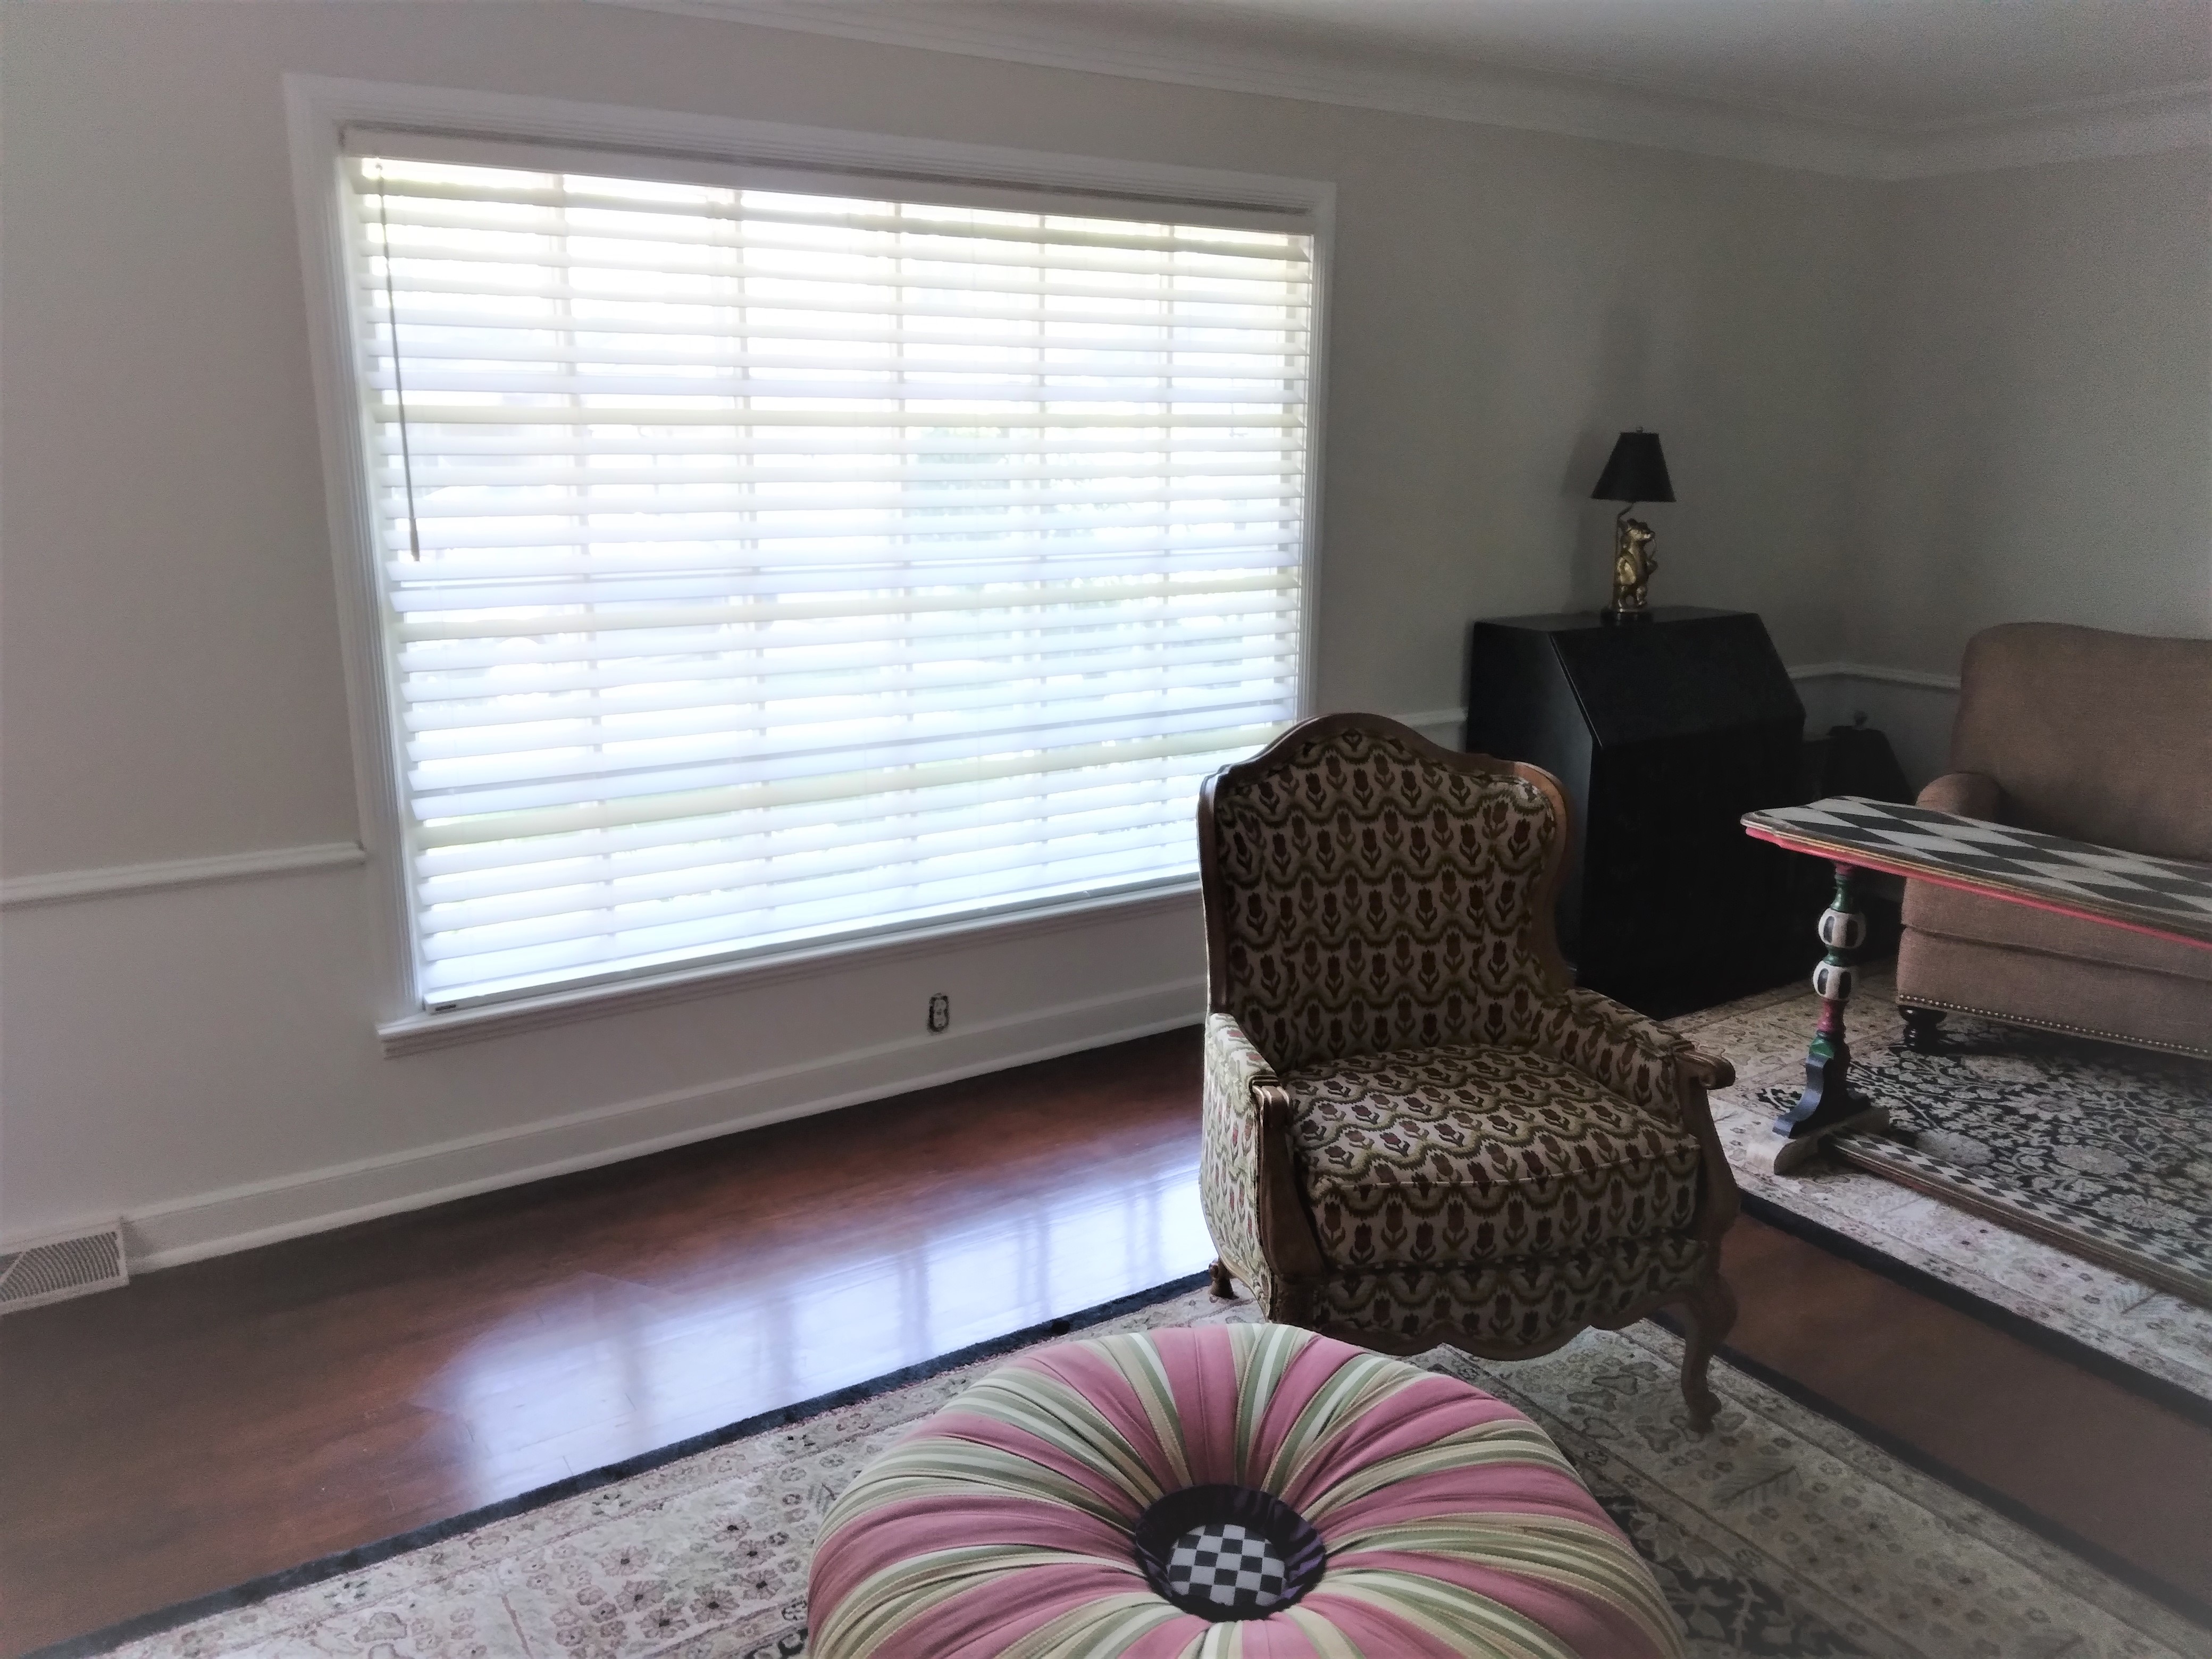 White faux wood blind in Springfield Illinois living room.  BudgetBlinds  Window Coverings  Blinds  SpringfieldIllinois